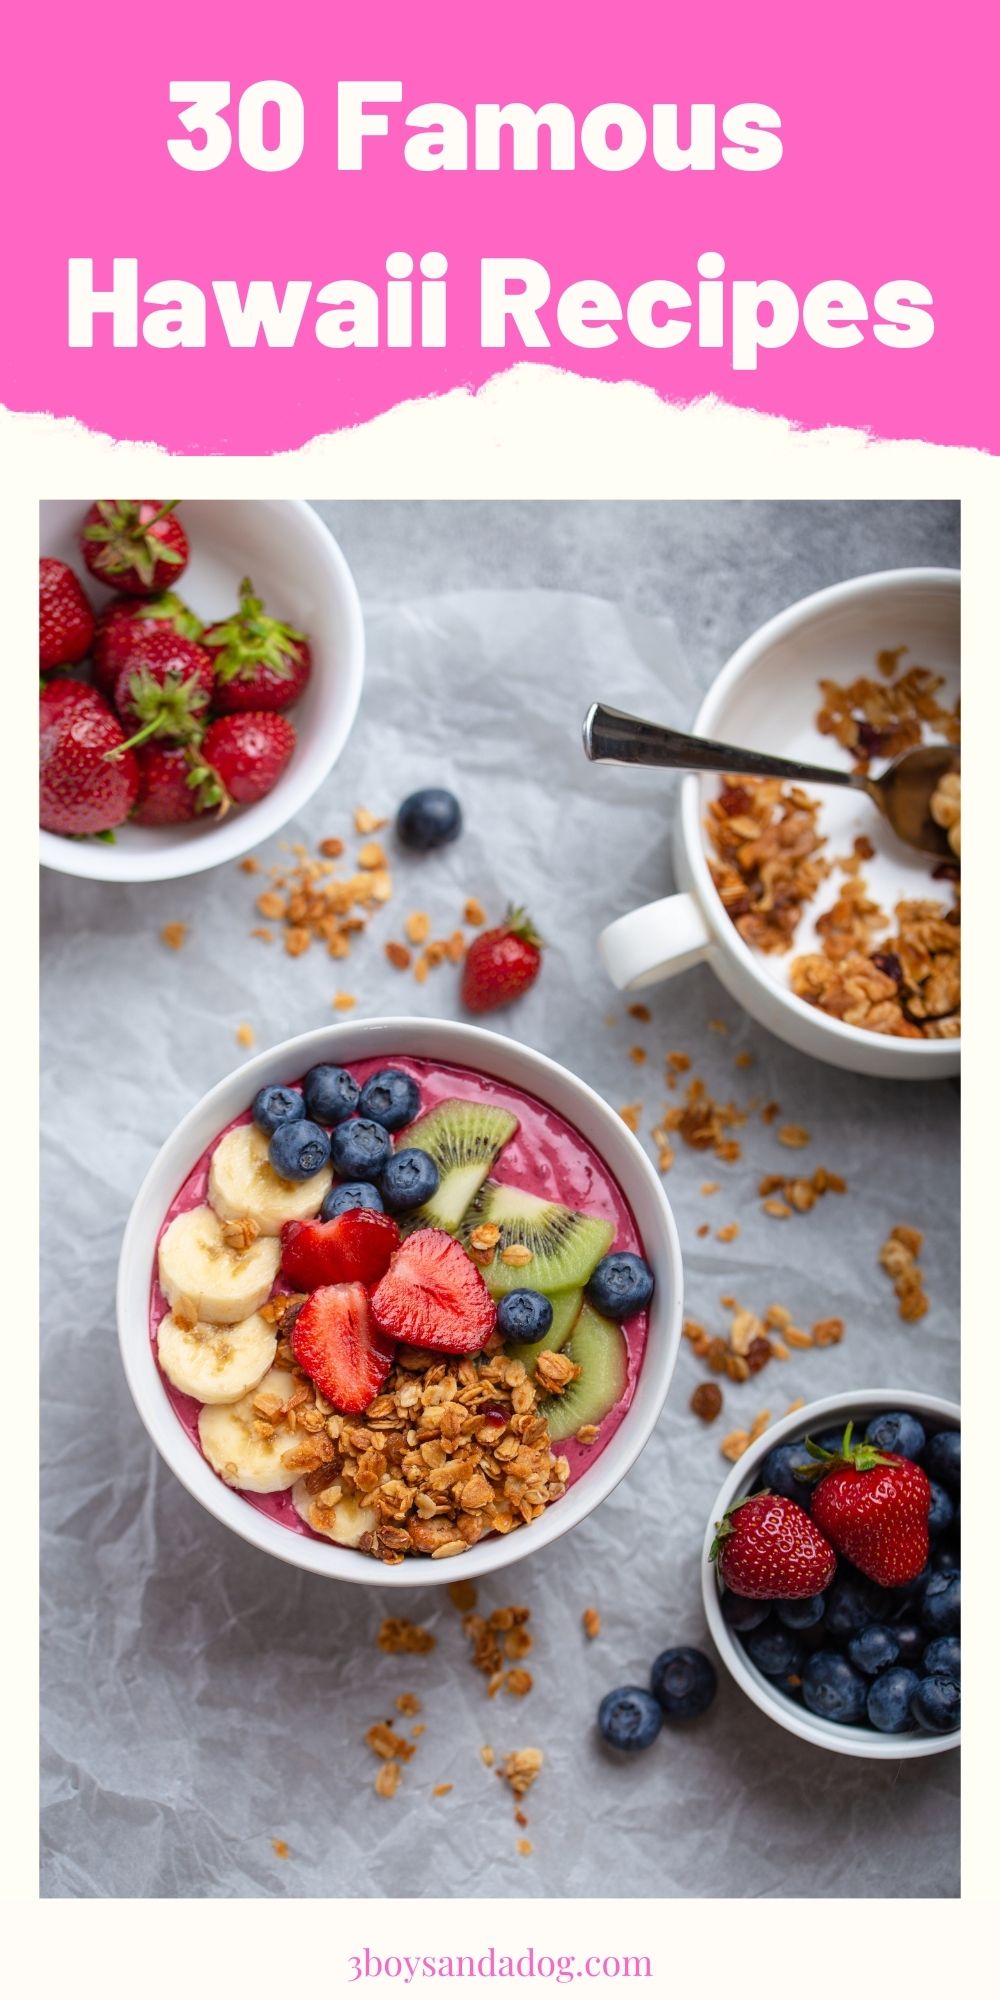 pin with an image of acai bowls for 30 famous Hawaii recipes